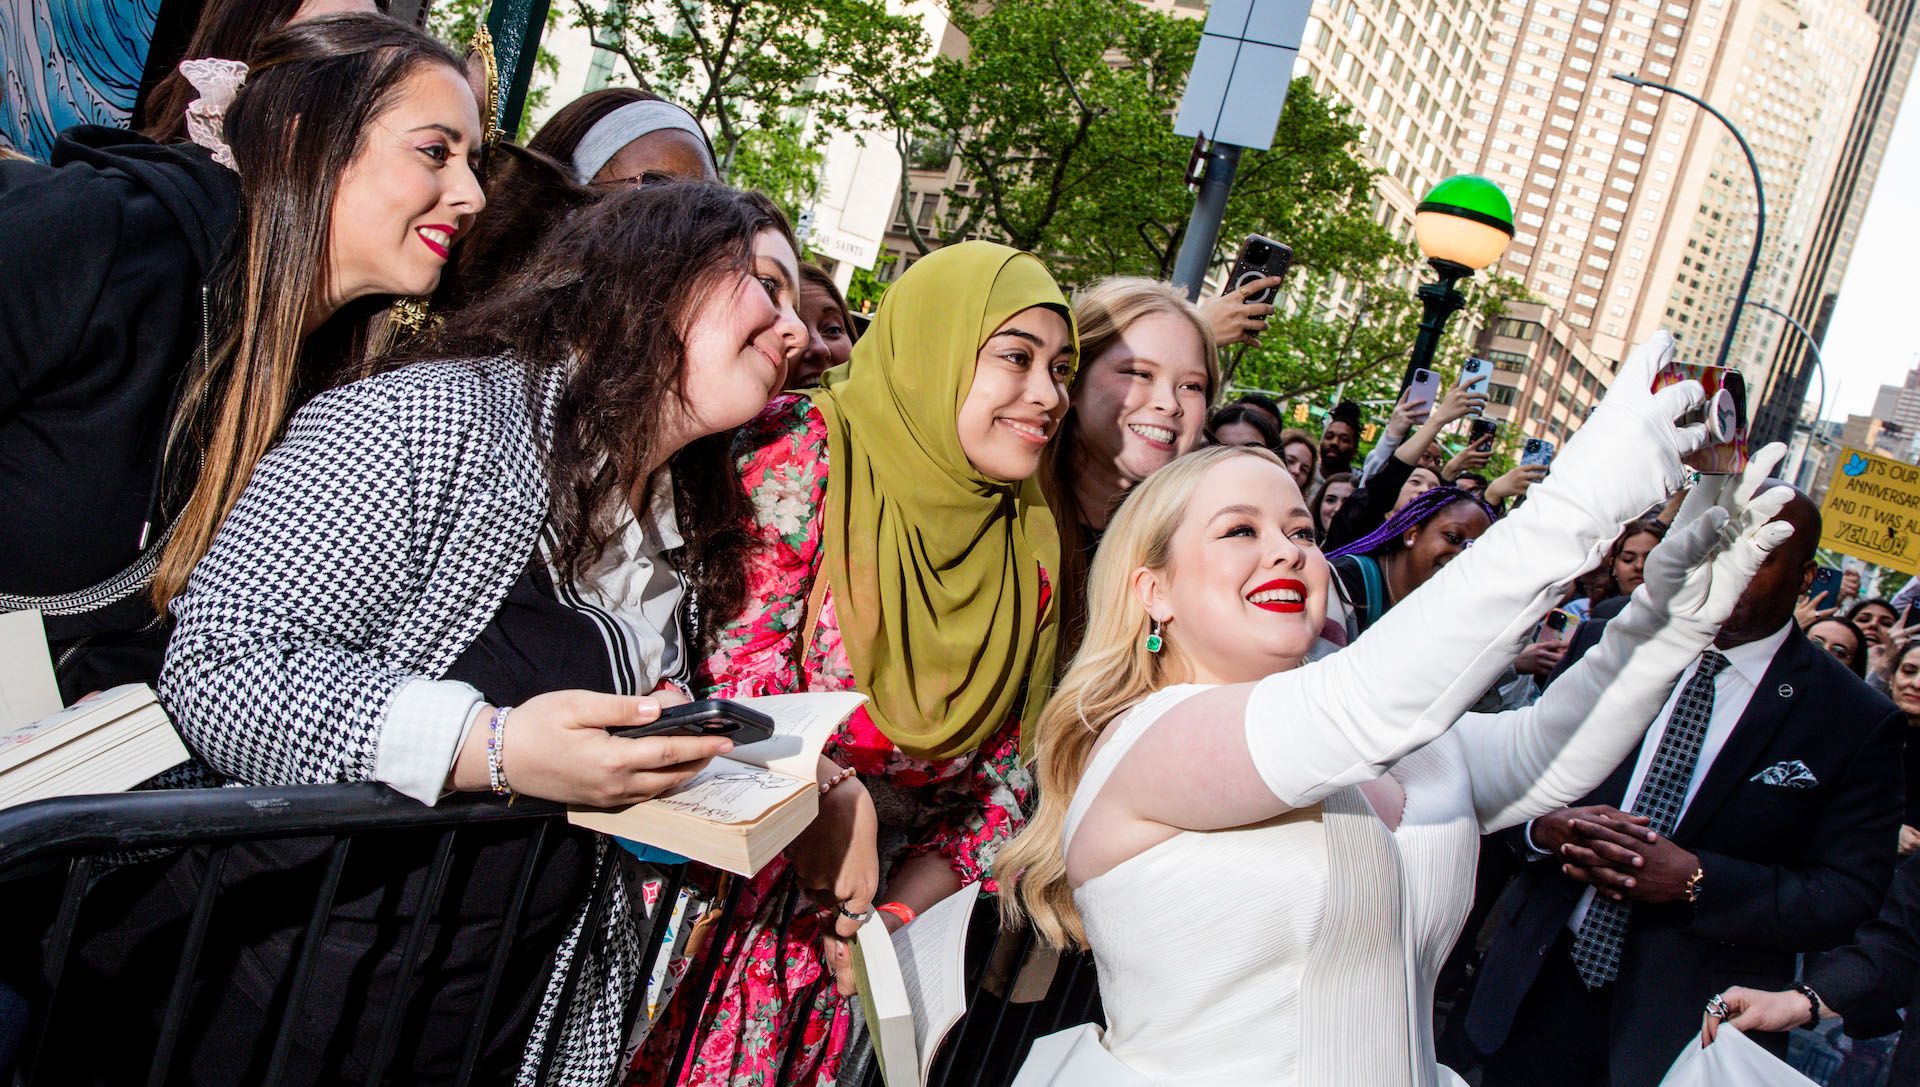 Actor Nicola Coughlan wearing a white dress and taking selfies with fans outside.